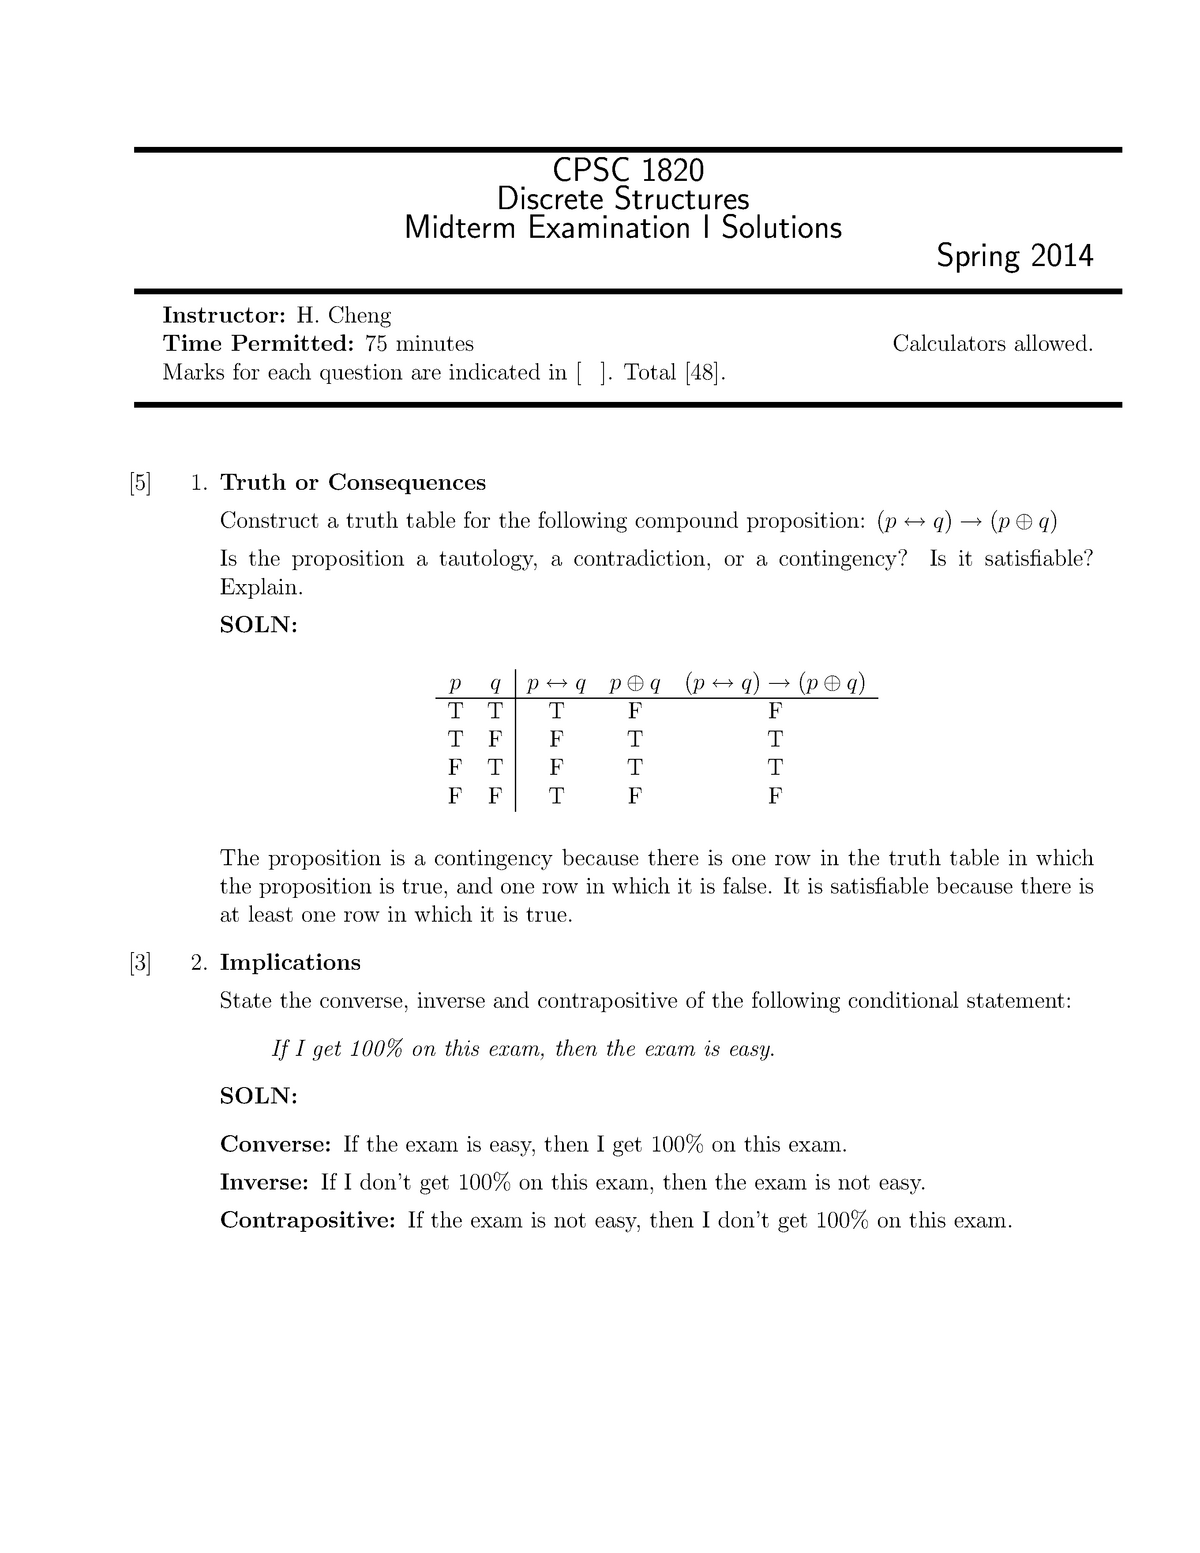 midterm-exam-12-february-2014-answers-cpsc-1820-discrete-structures